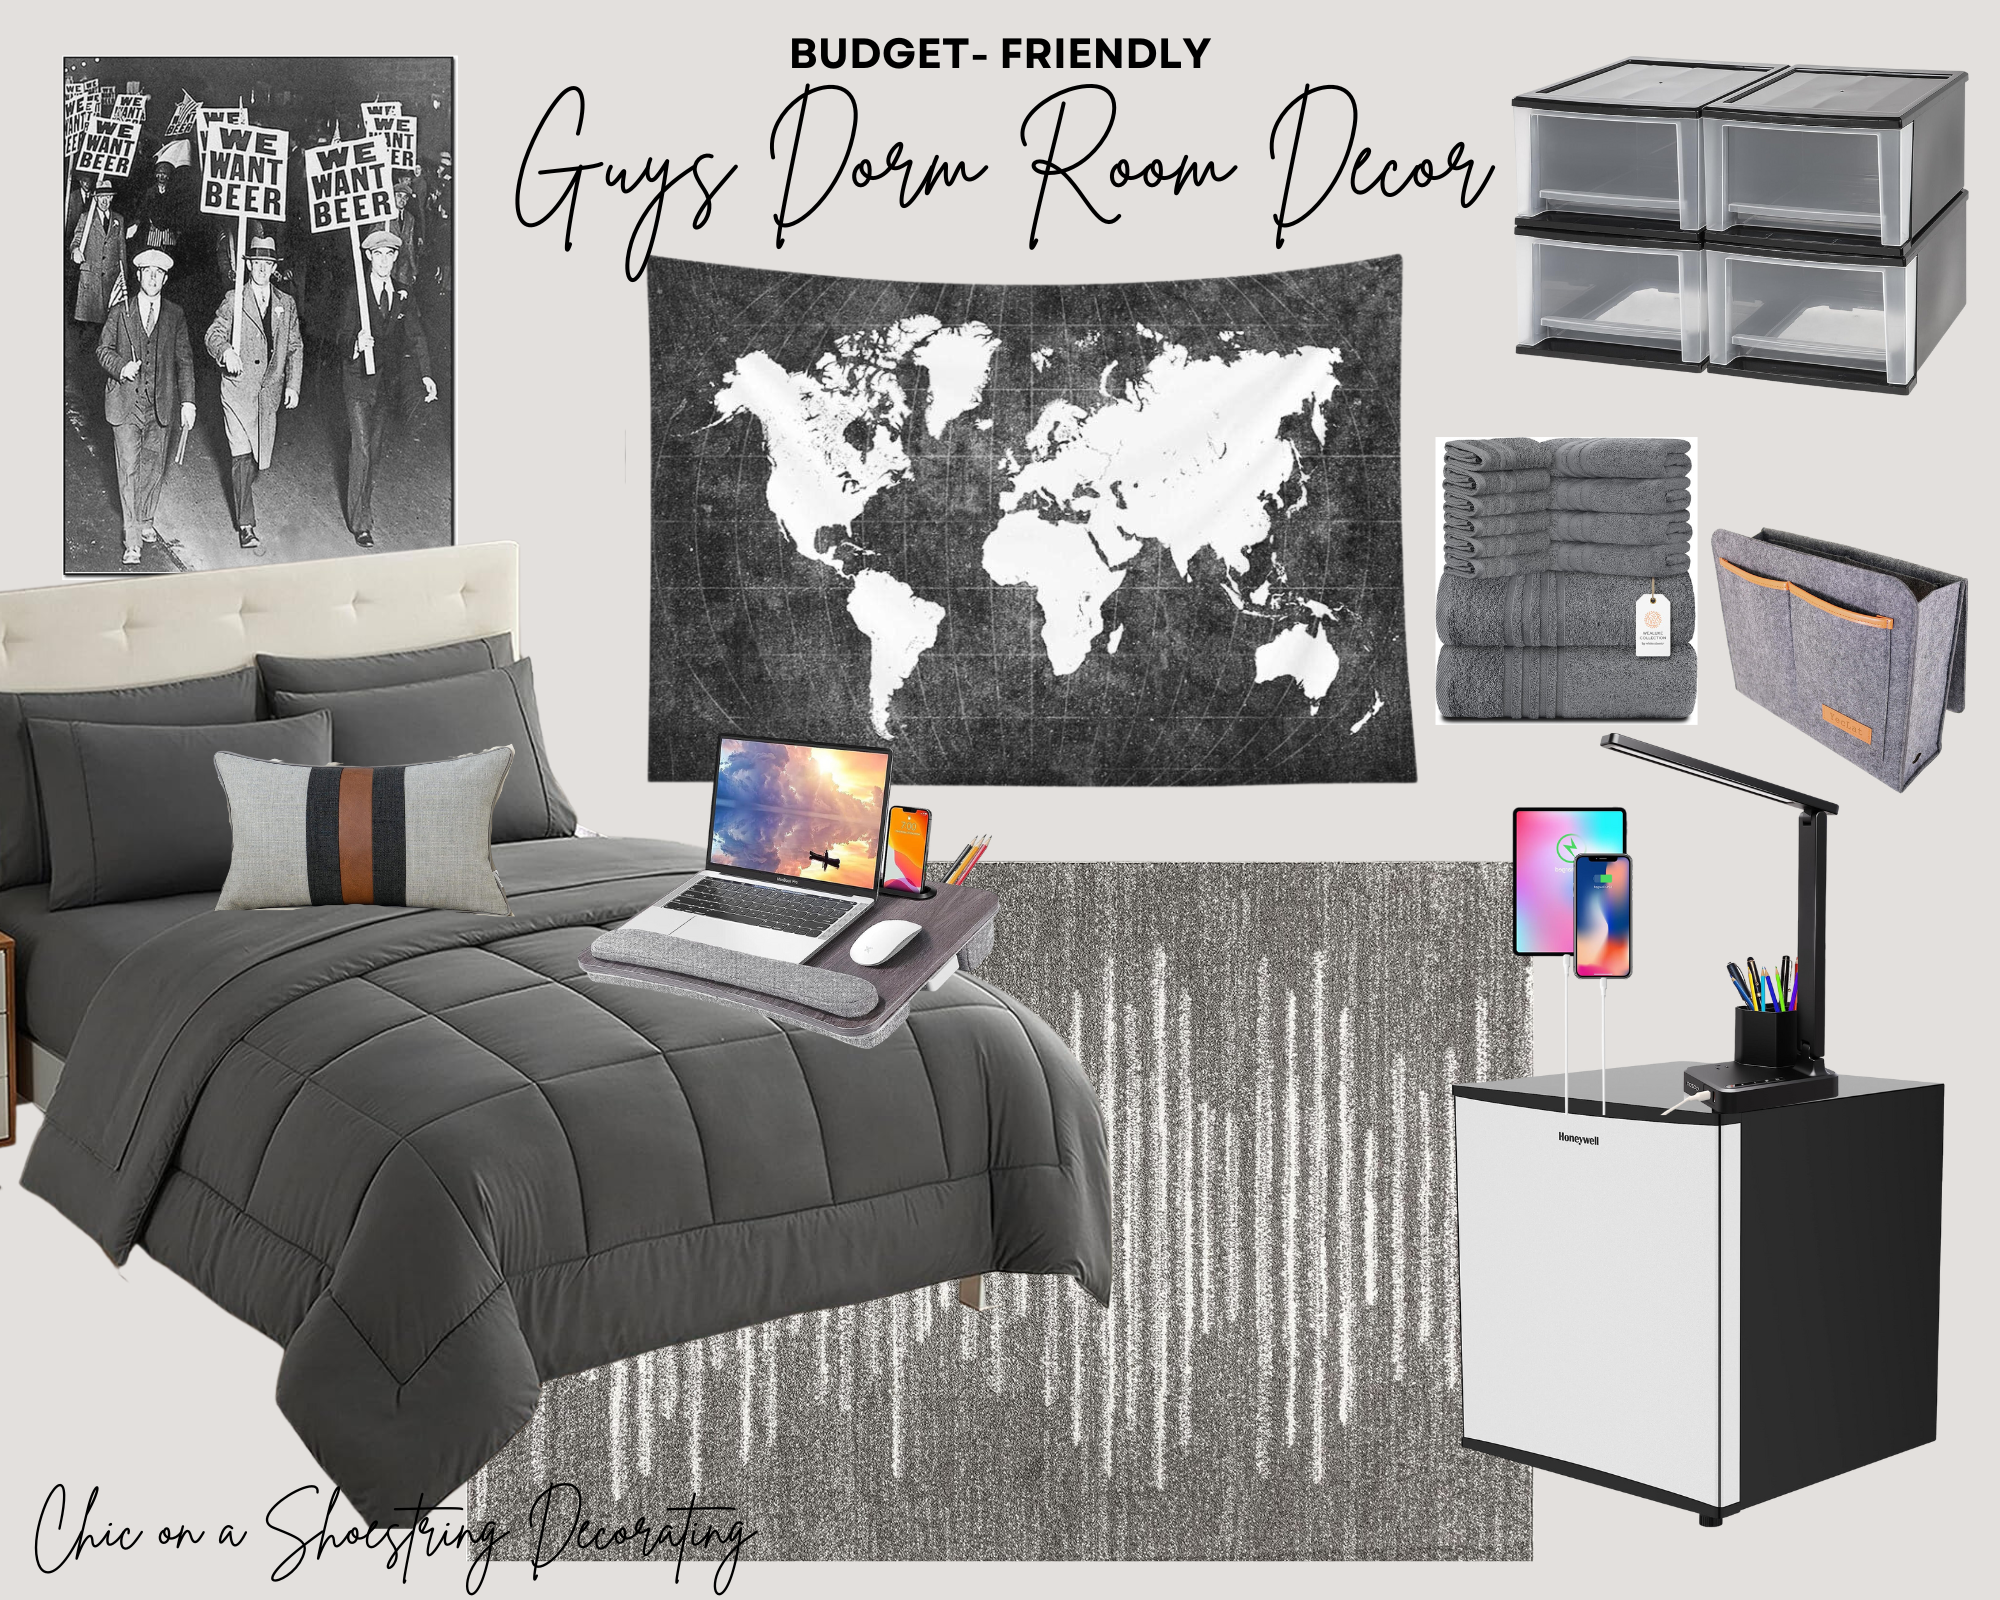 Chic on a Shoestring Decorating: Budget-Friendly Guys Dorm Room ...